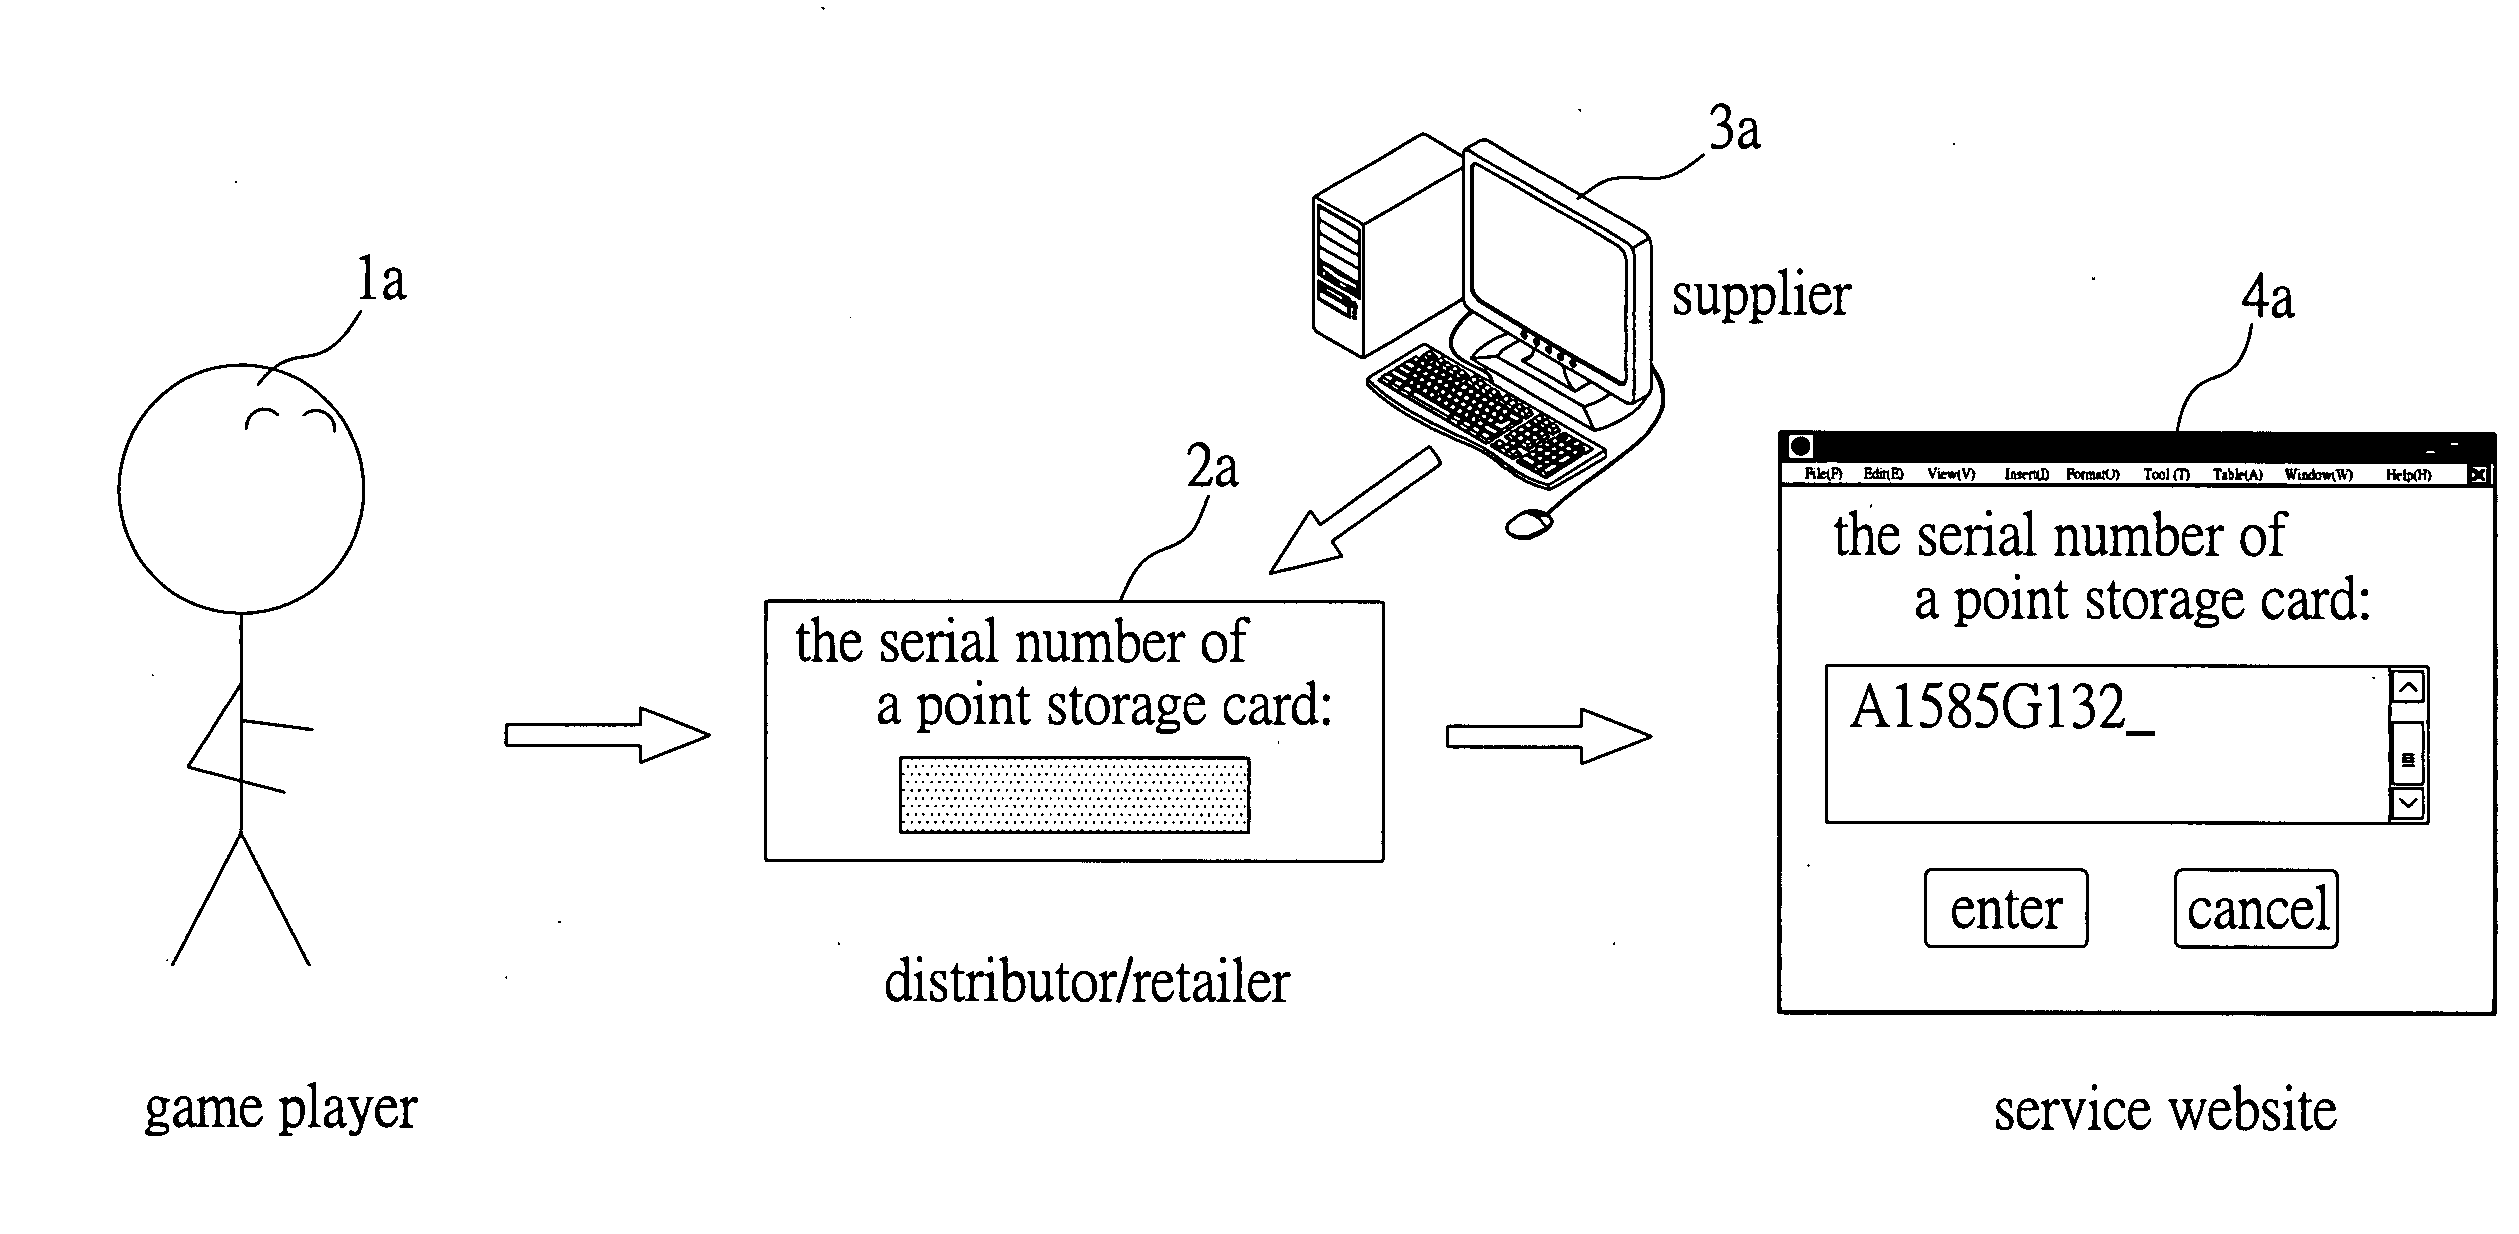 System and method for activating serial number of a point storage card